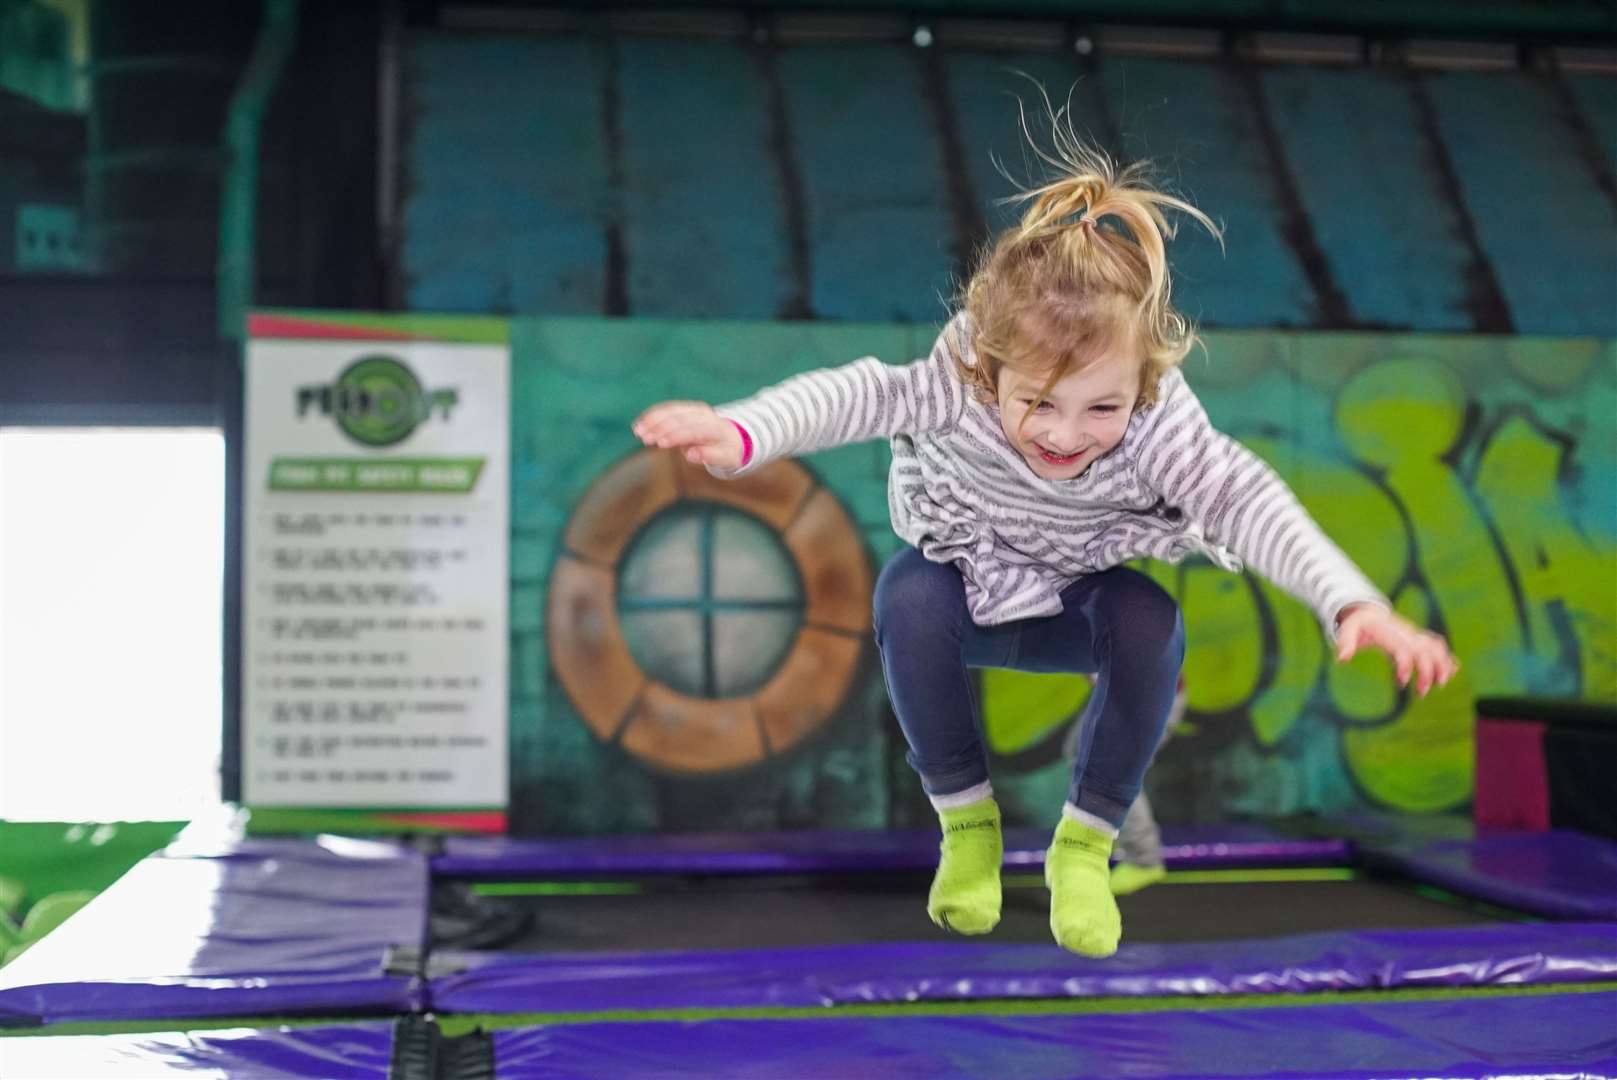 Flip Out is among the trampoline parks reopening